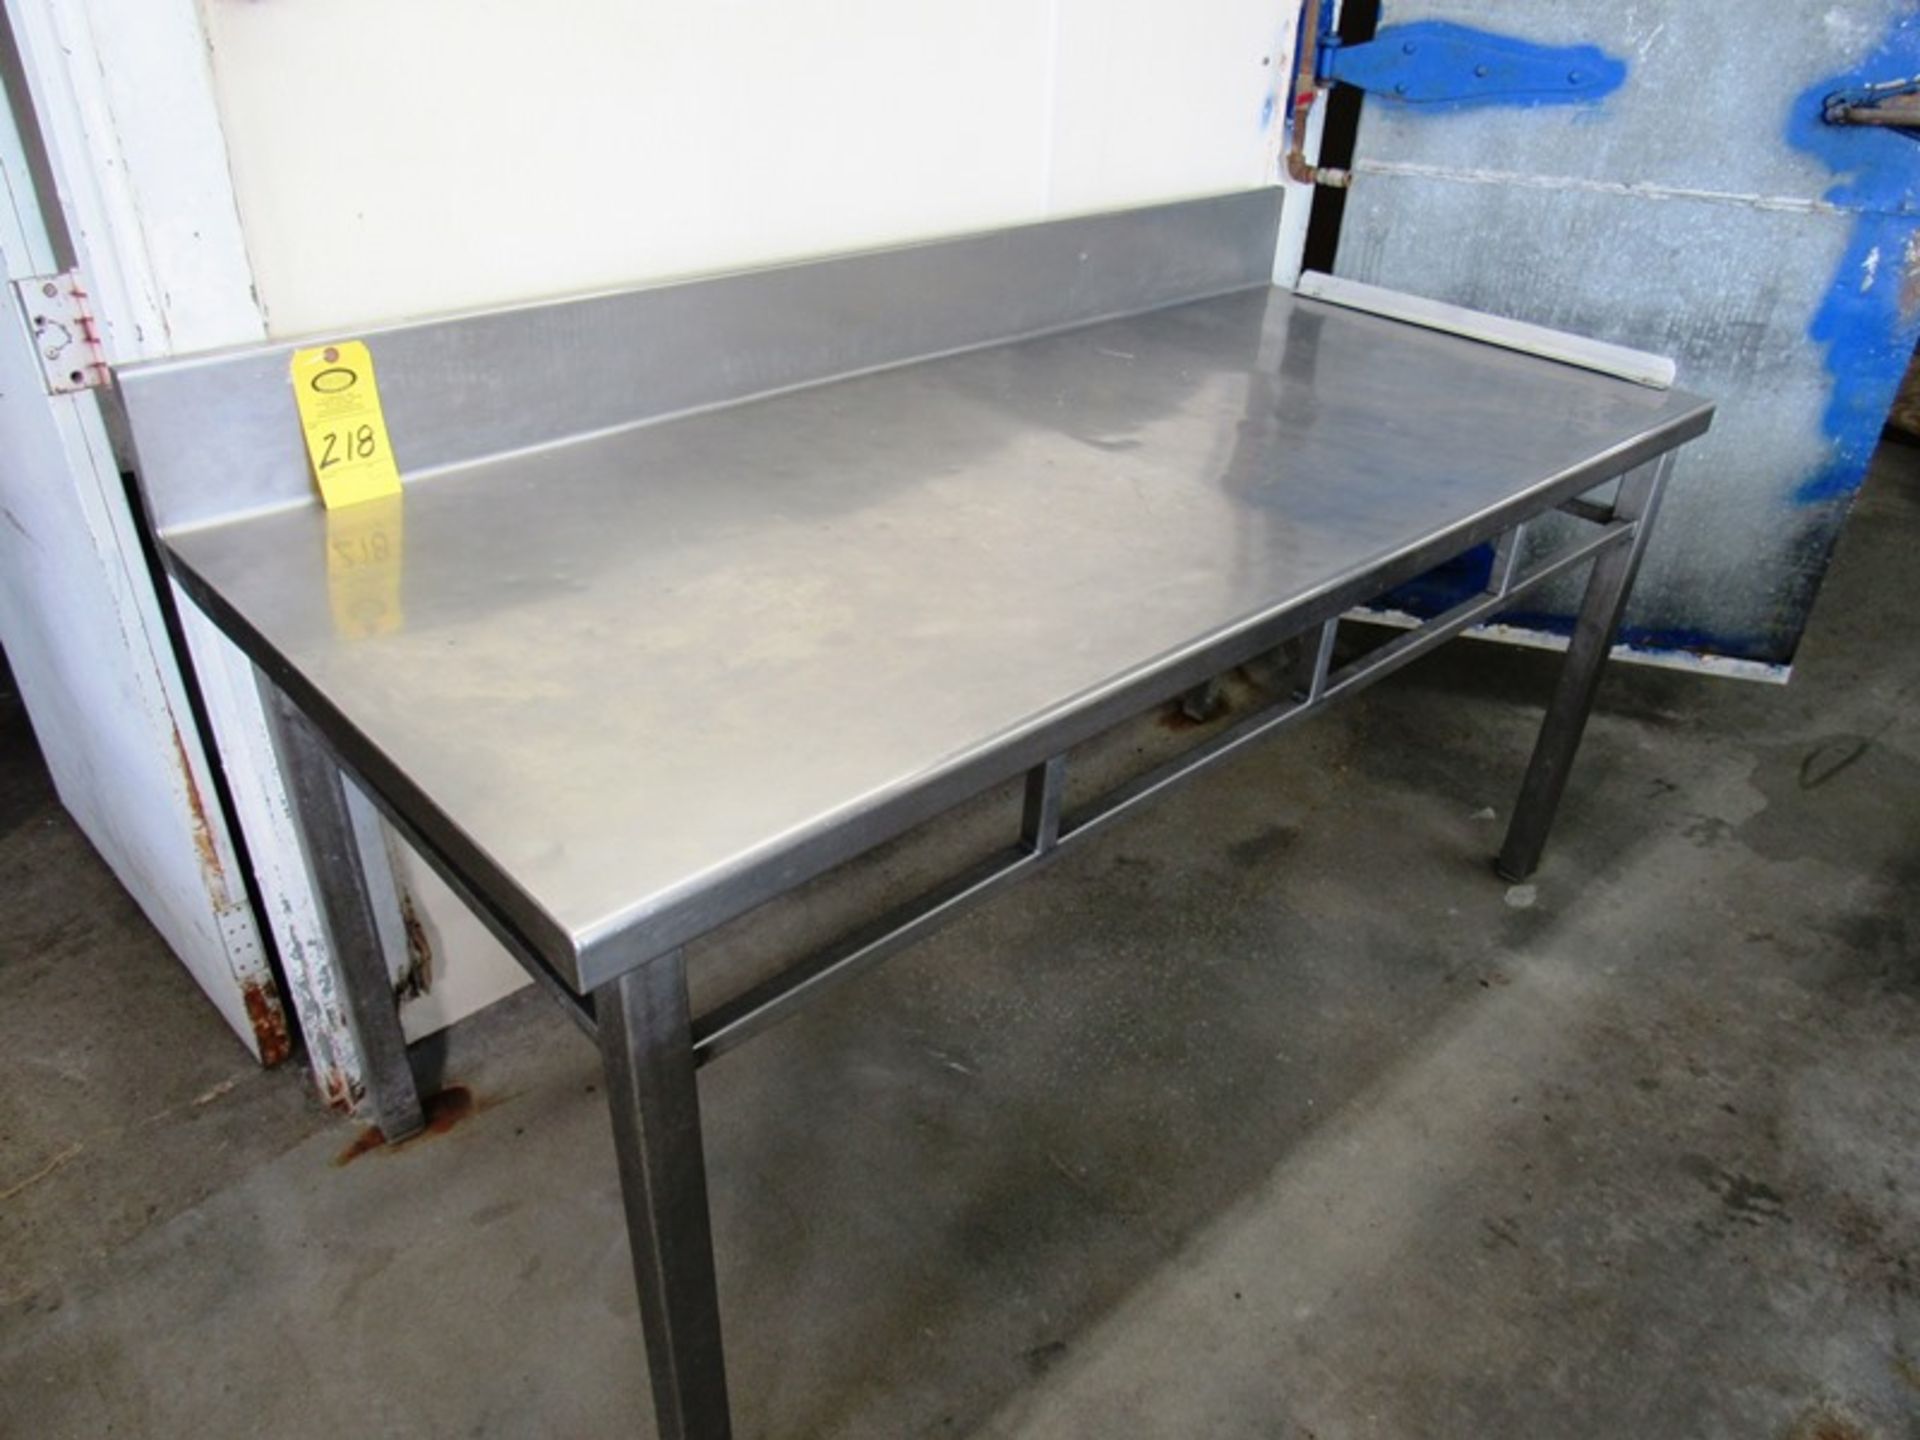 72" x 32" Stainless Steel Table W/Backsplash(All Funds Must Be Received by Friday, December 6th,